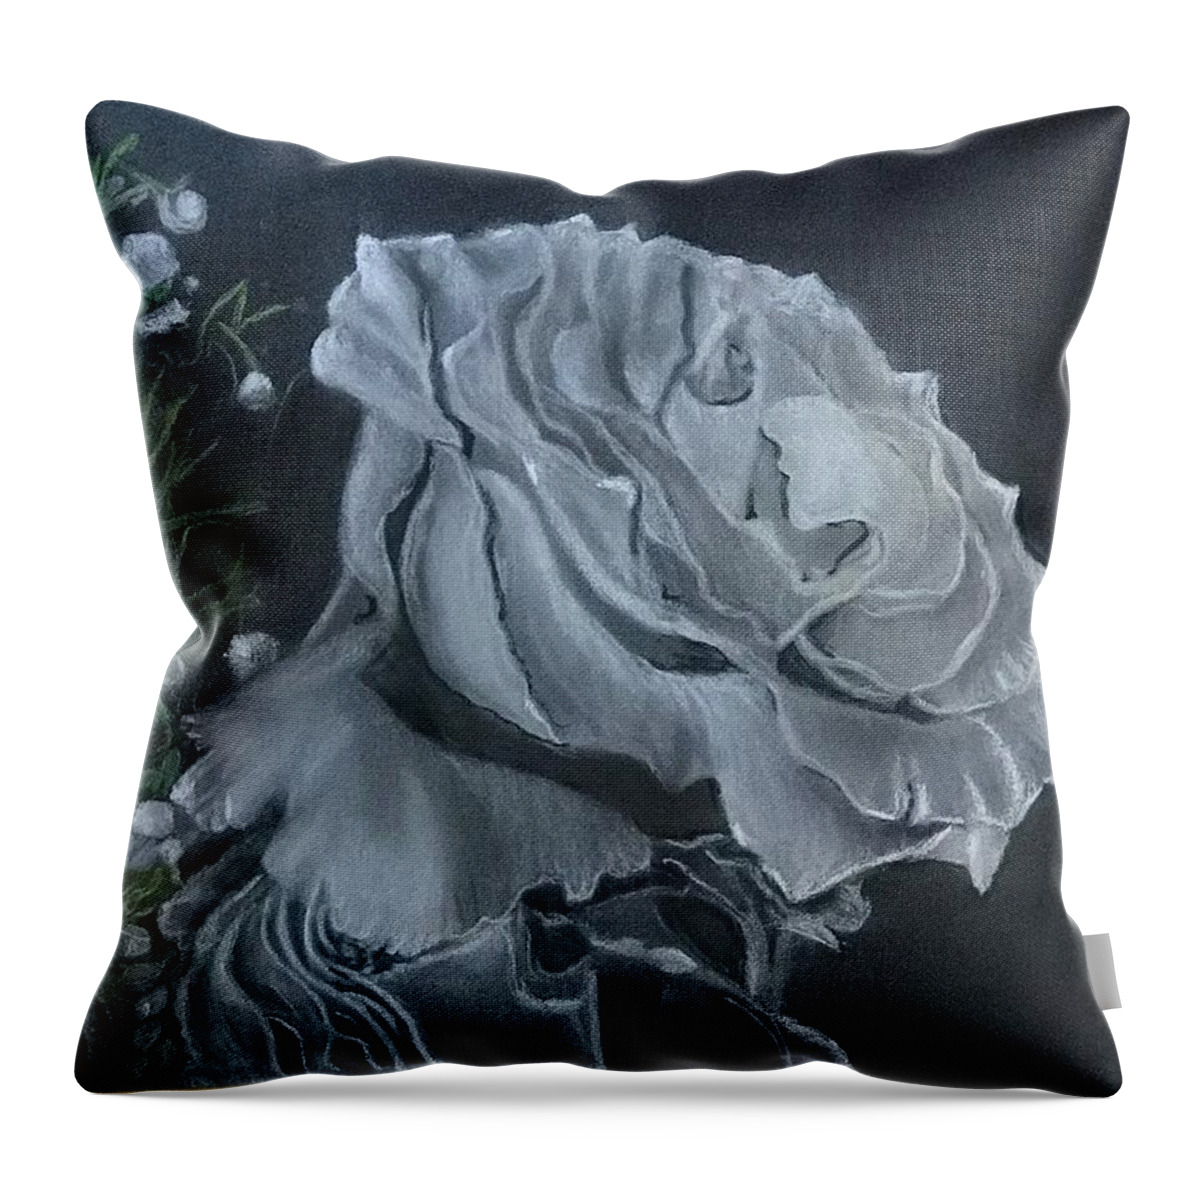 Black And White Throw Pillow featuring the pastel Celebrate Life by Juliette Becker